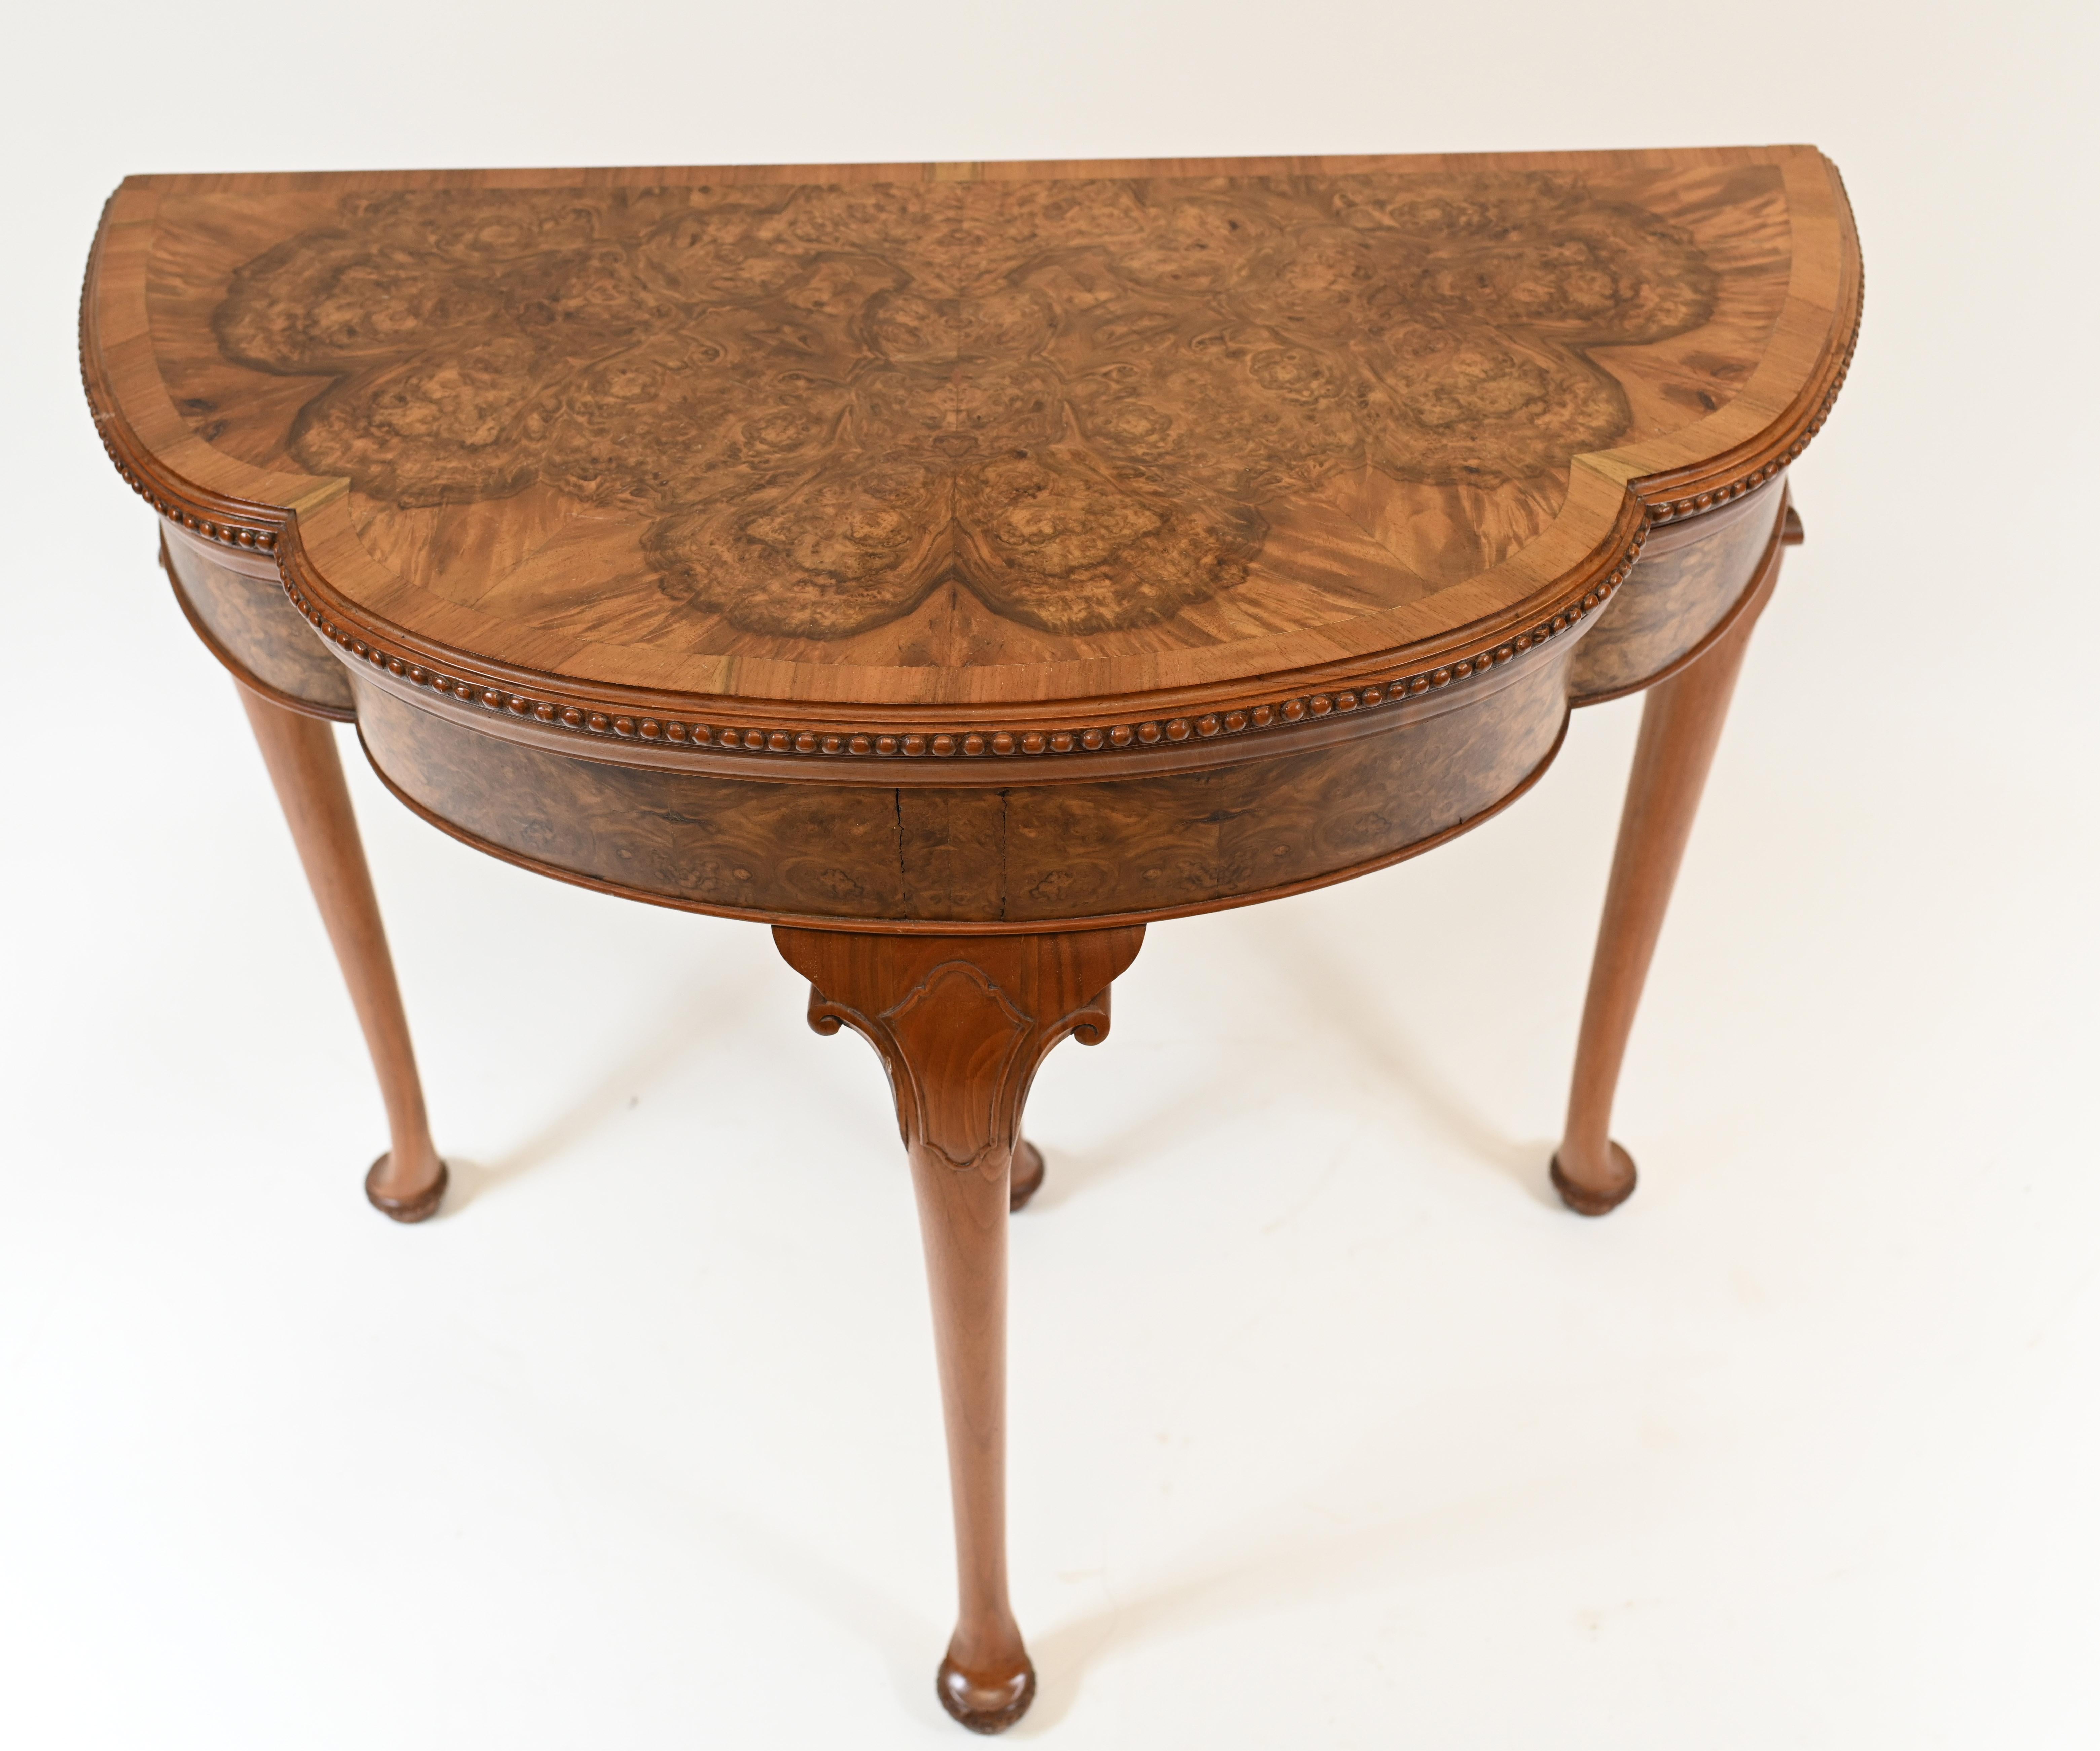 Elegant Queen Anne style card / games table
Hand crafted from burr walnut and circa 1930




Dimensions in inches (CM):
Width x Depth x Height
33 (83) x 33 (83) open height 28.5 (72).

